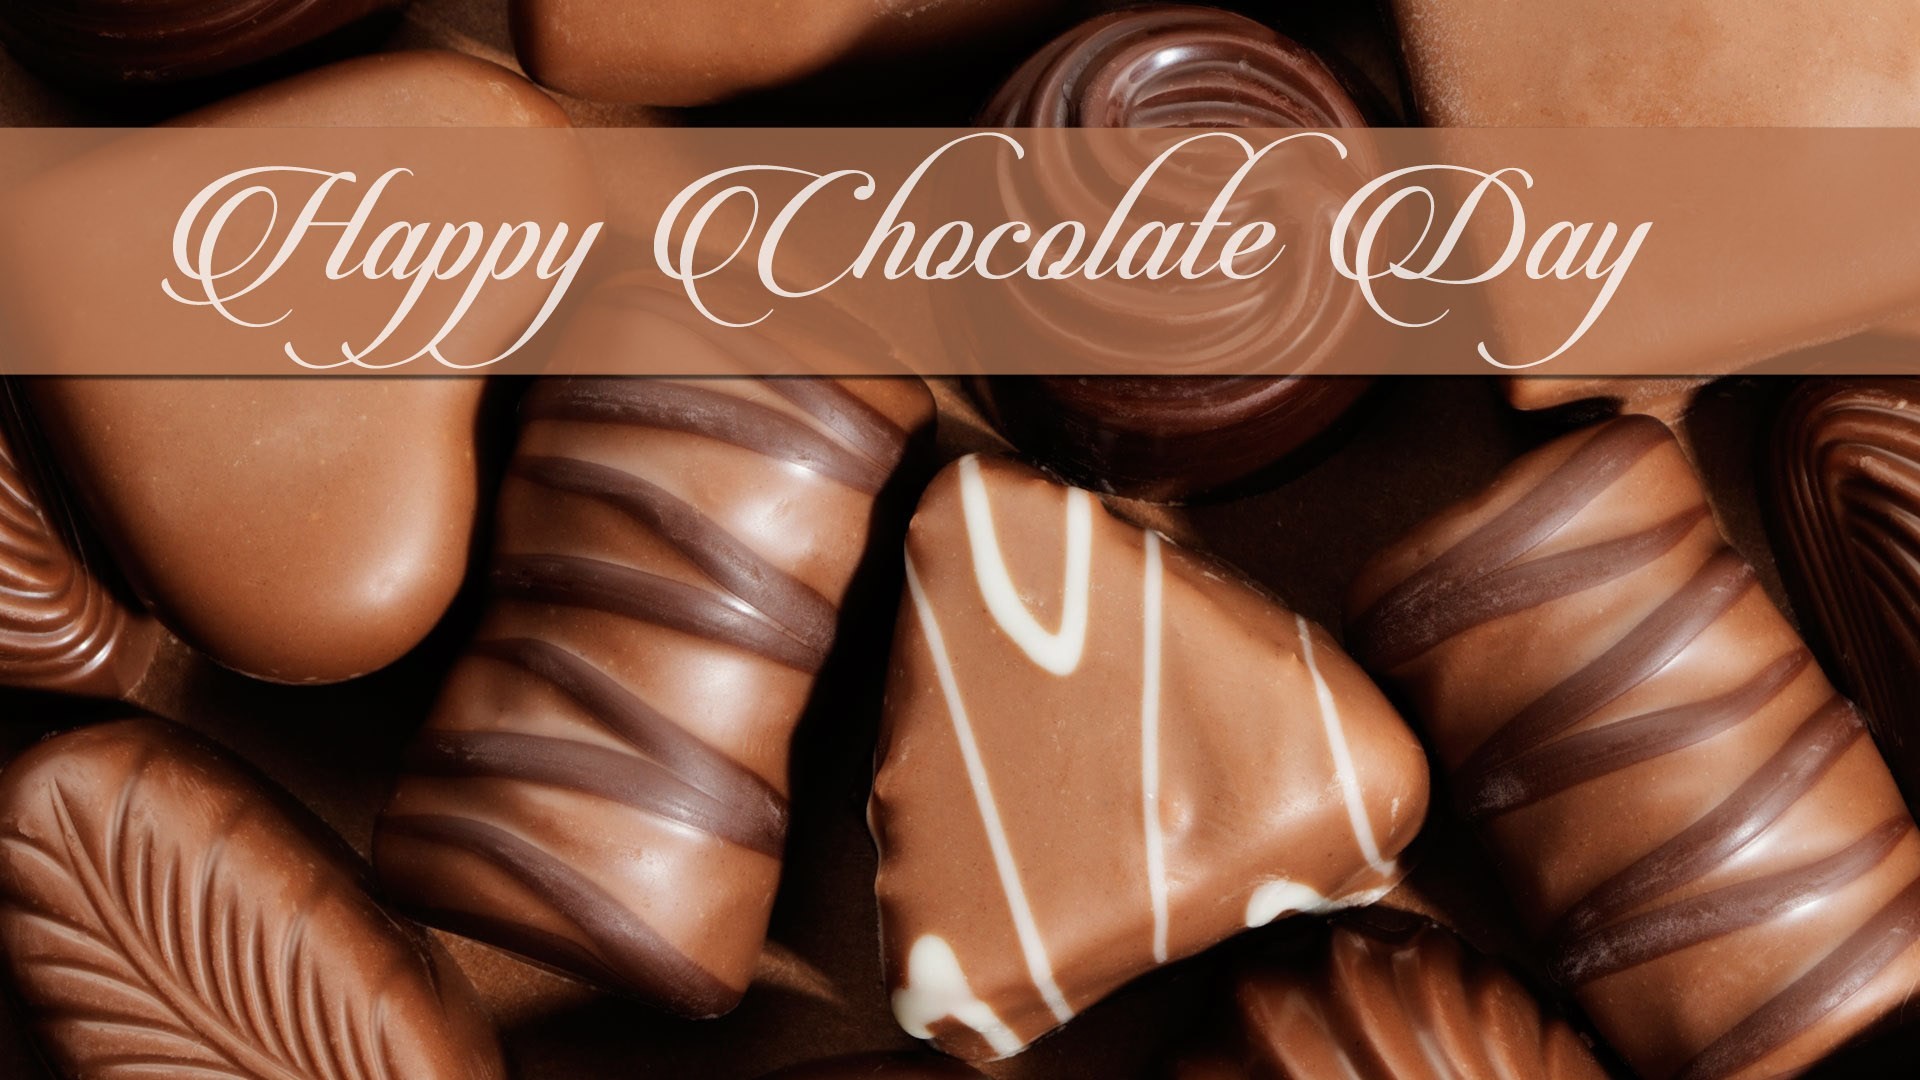 1920x1080 Download – Chocolate Day Images for Whatsapp DP Profile